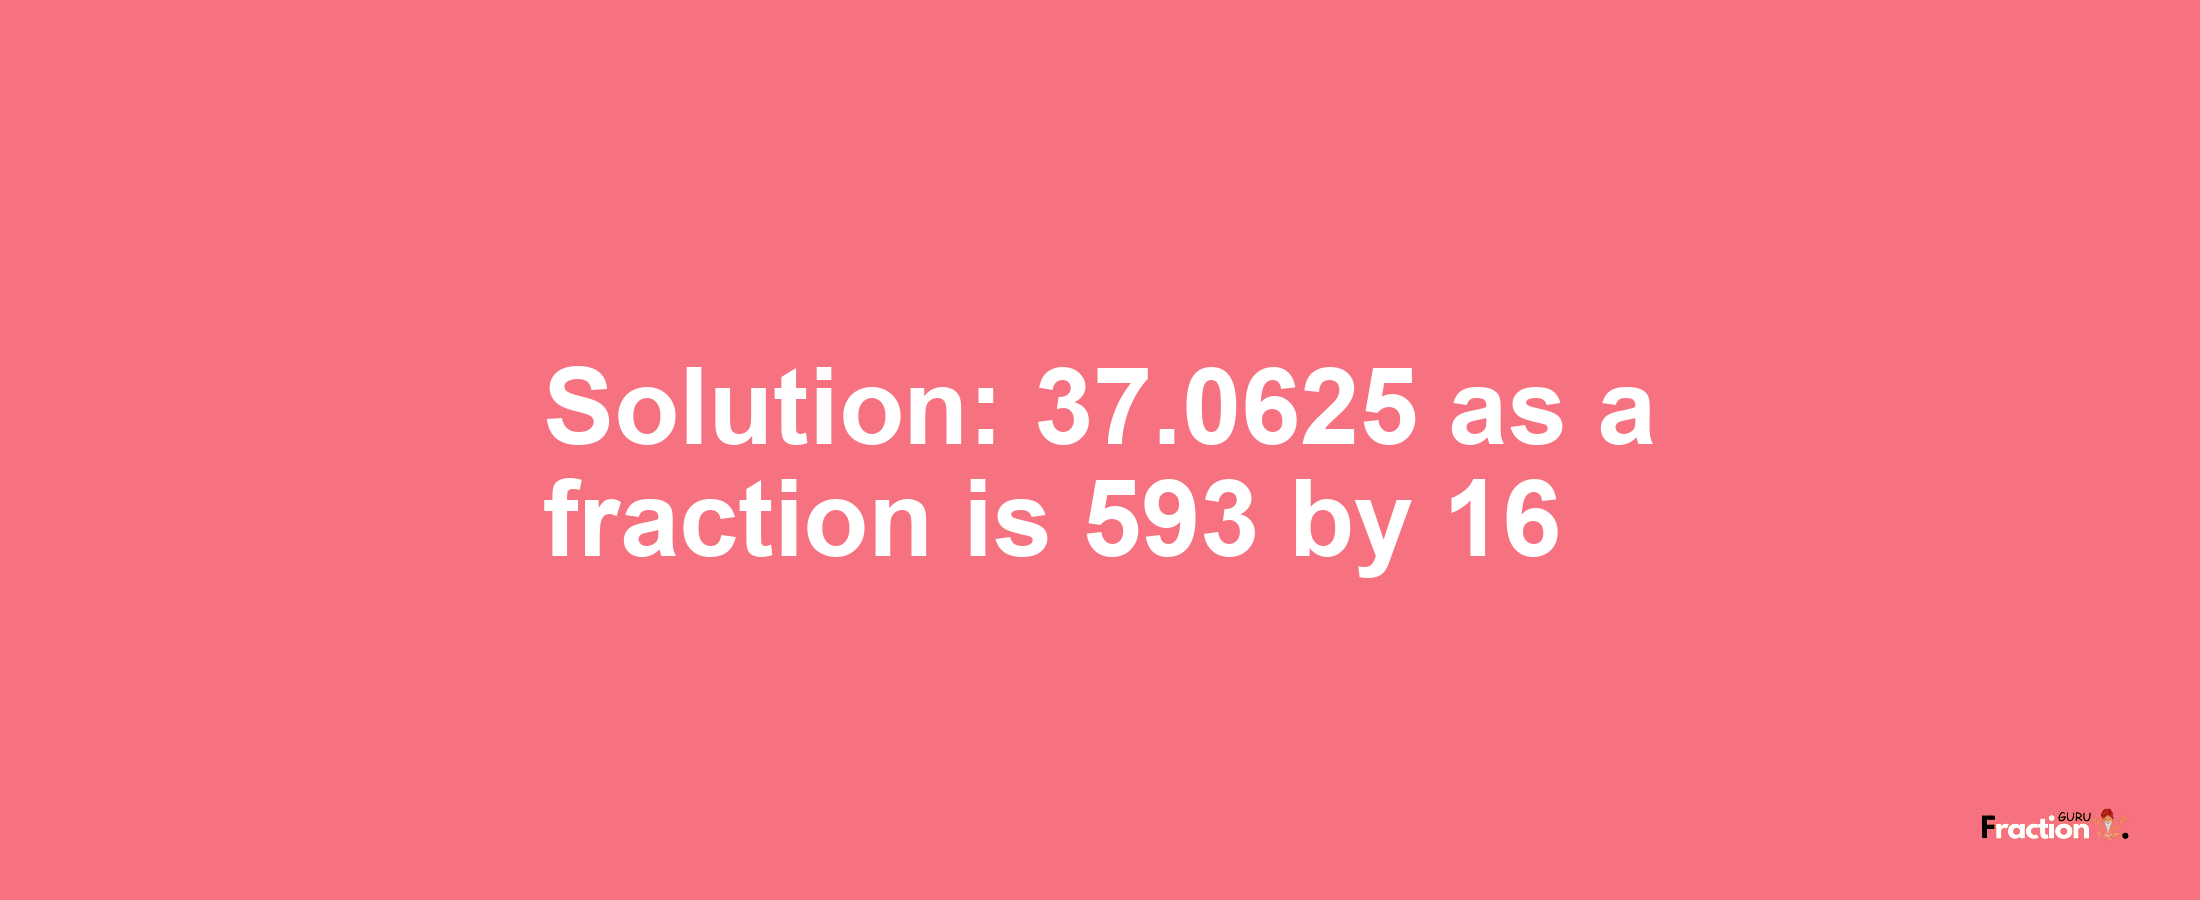 Solution:37.0625 as a fraction is 593/16